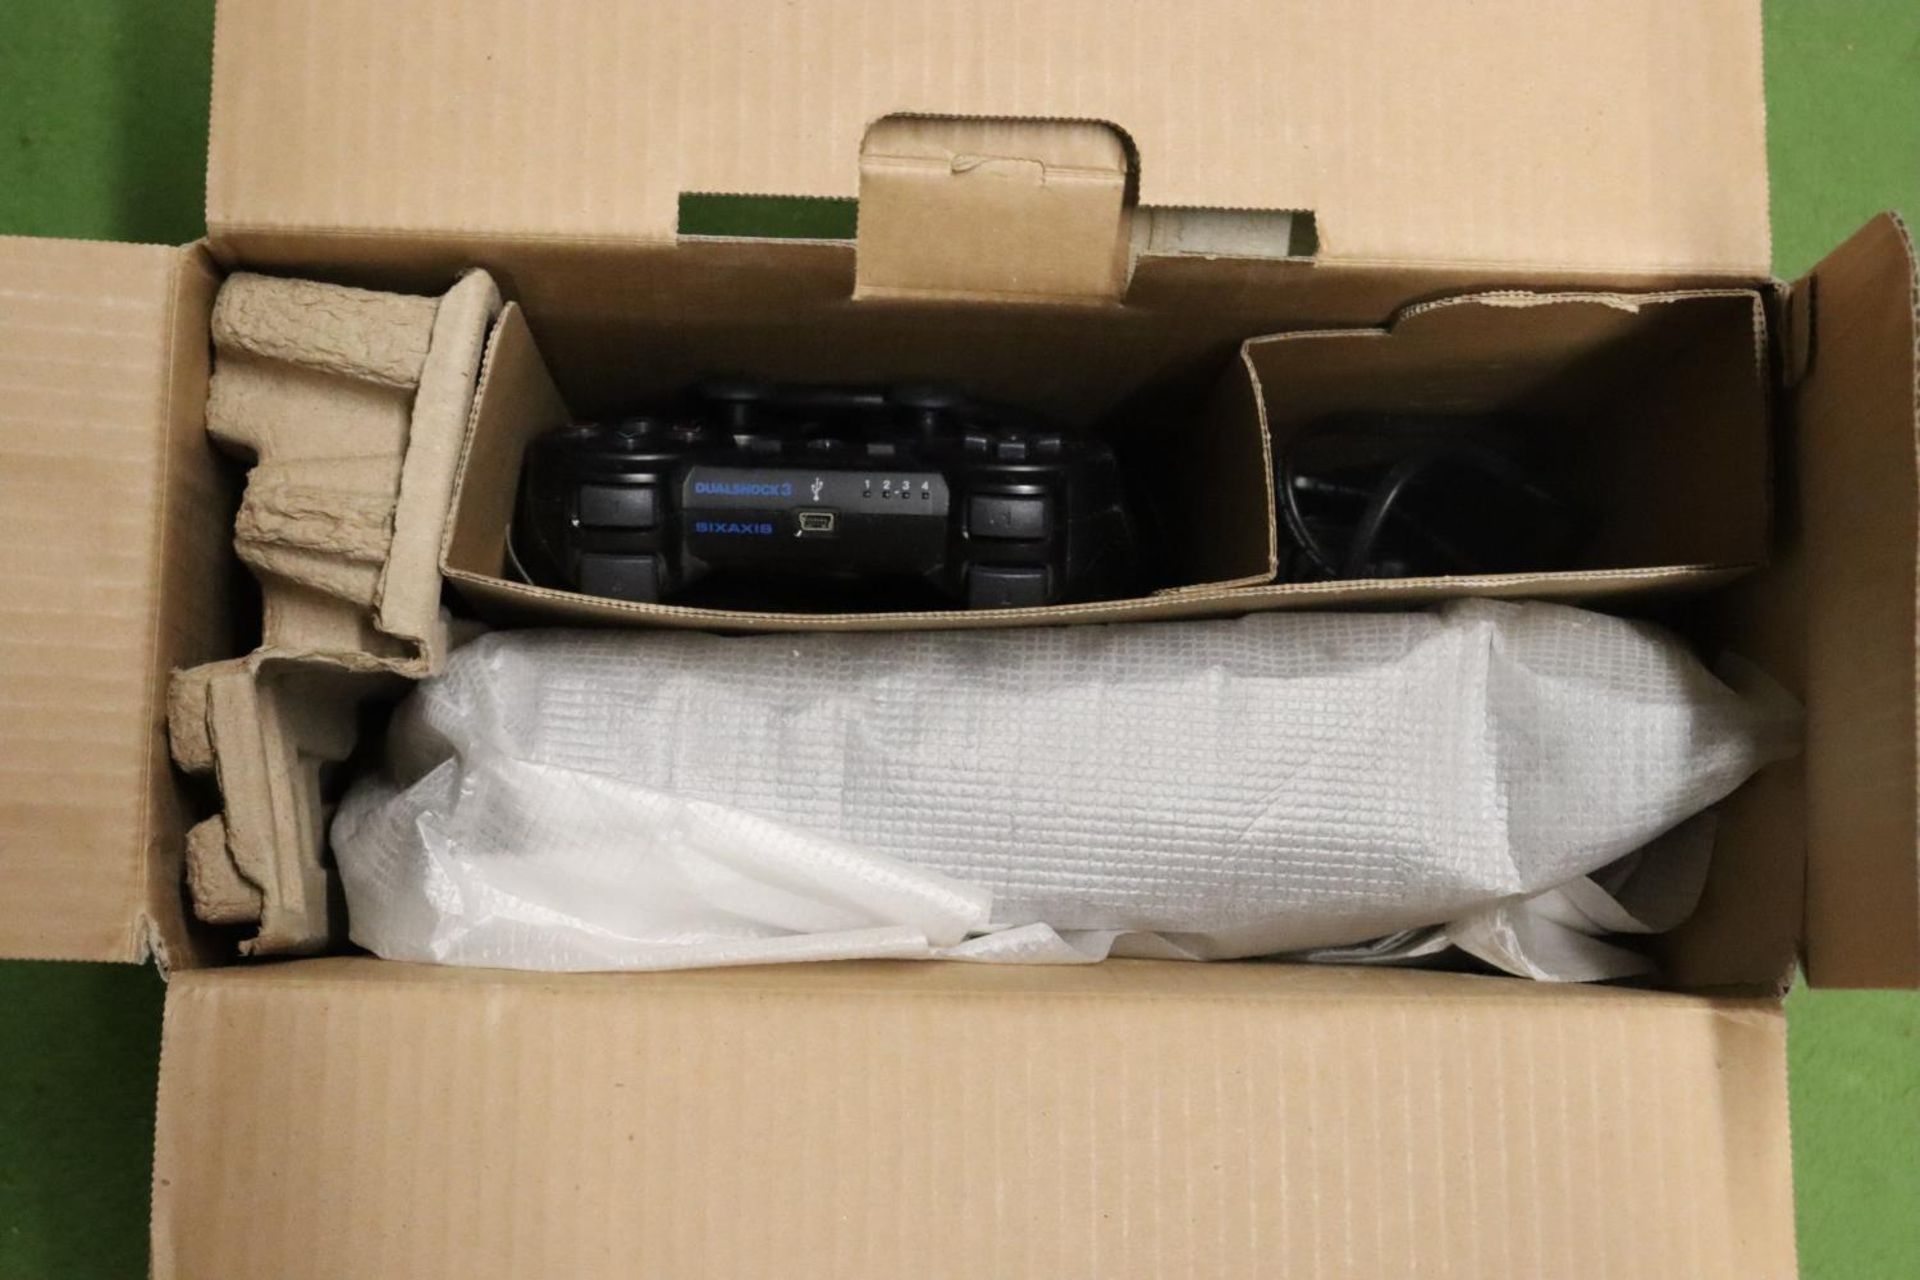 A BOXED PLAYSTATION 3, 160 GB WITH A CONTROLLER AND POWER CABLE - Image 5 of 5